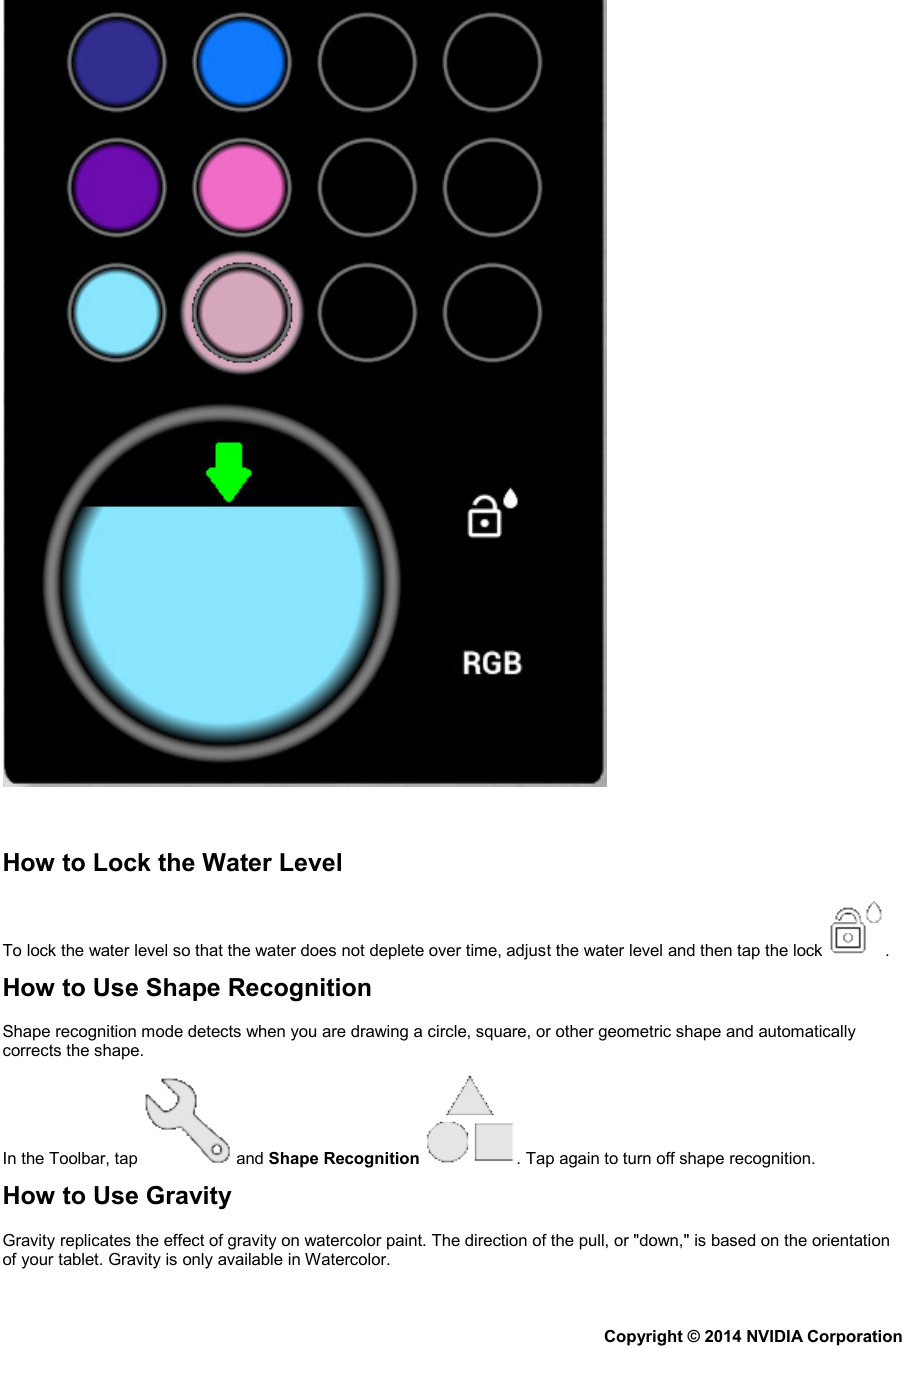    How to Lock the Water Level To lock the water level so that the water does not deplete over time, adjust the water level and then tap the lock  . How to Use Shape Recognition Shape recognition mode detects when you are drawing a circle, square, or other geometric shape and automatically corrects the shape. In the Toolbar, tap   and Shape Recognition  . Tap again to turn off shape recognition. How to Use Gravity Gravity replicates the effect of gravity on watercolor paint. The direction of the pull, or &quot;down,&quot; is based on the orientation of your tablet. Gravity is only available in Watercolor. Copyright © 2014 NVIDIA Corporation   